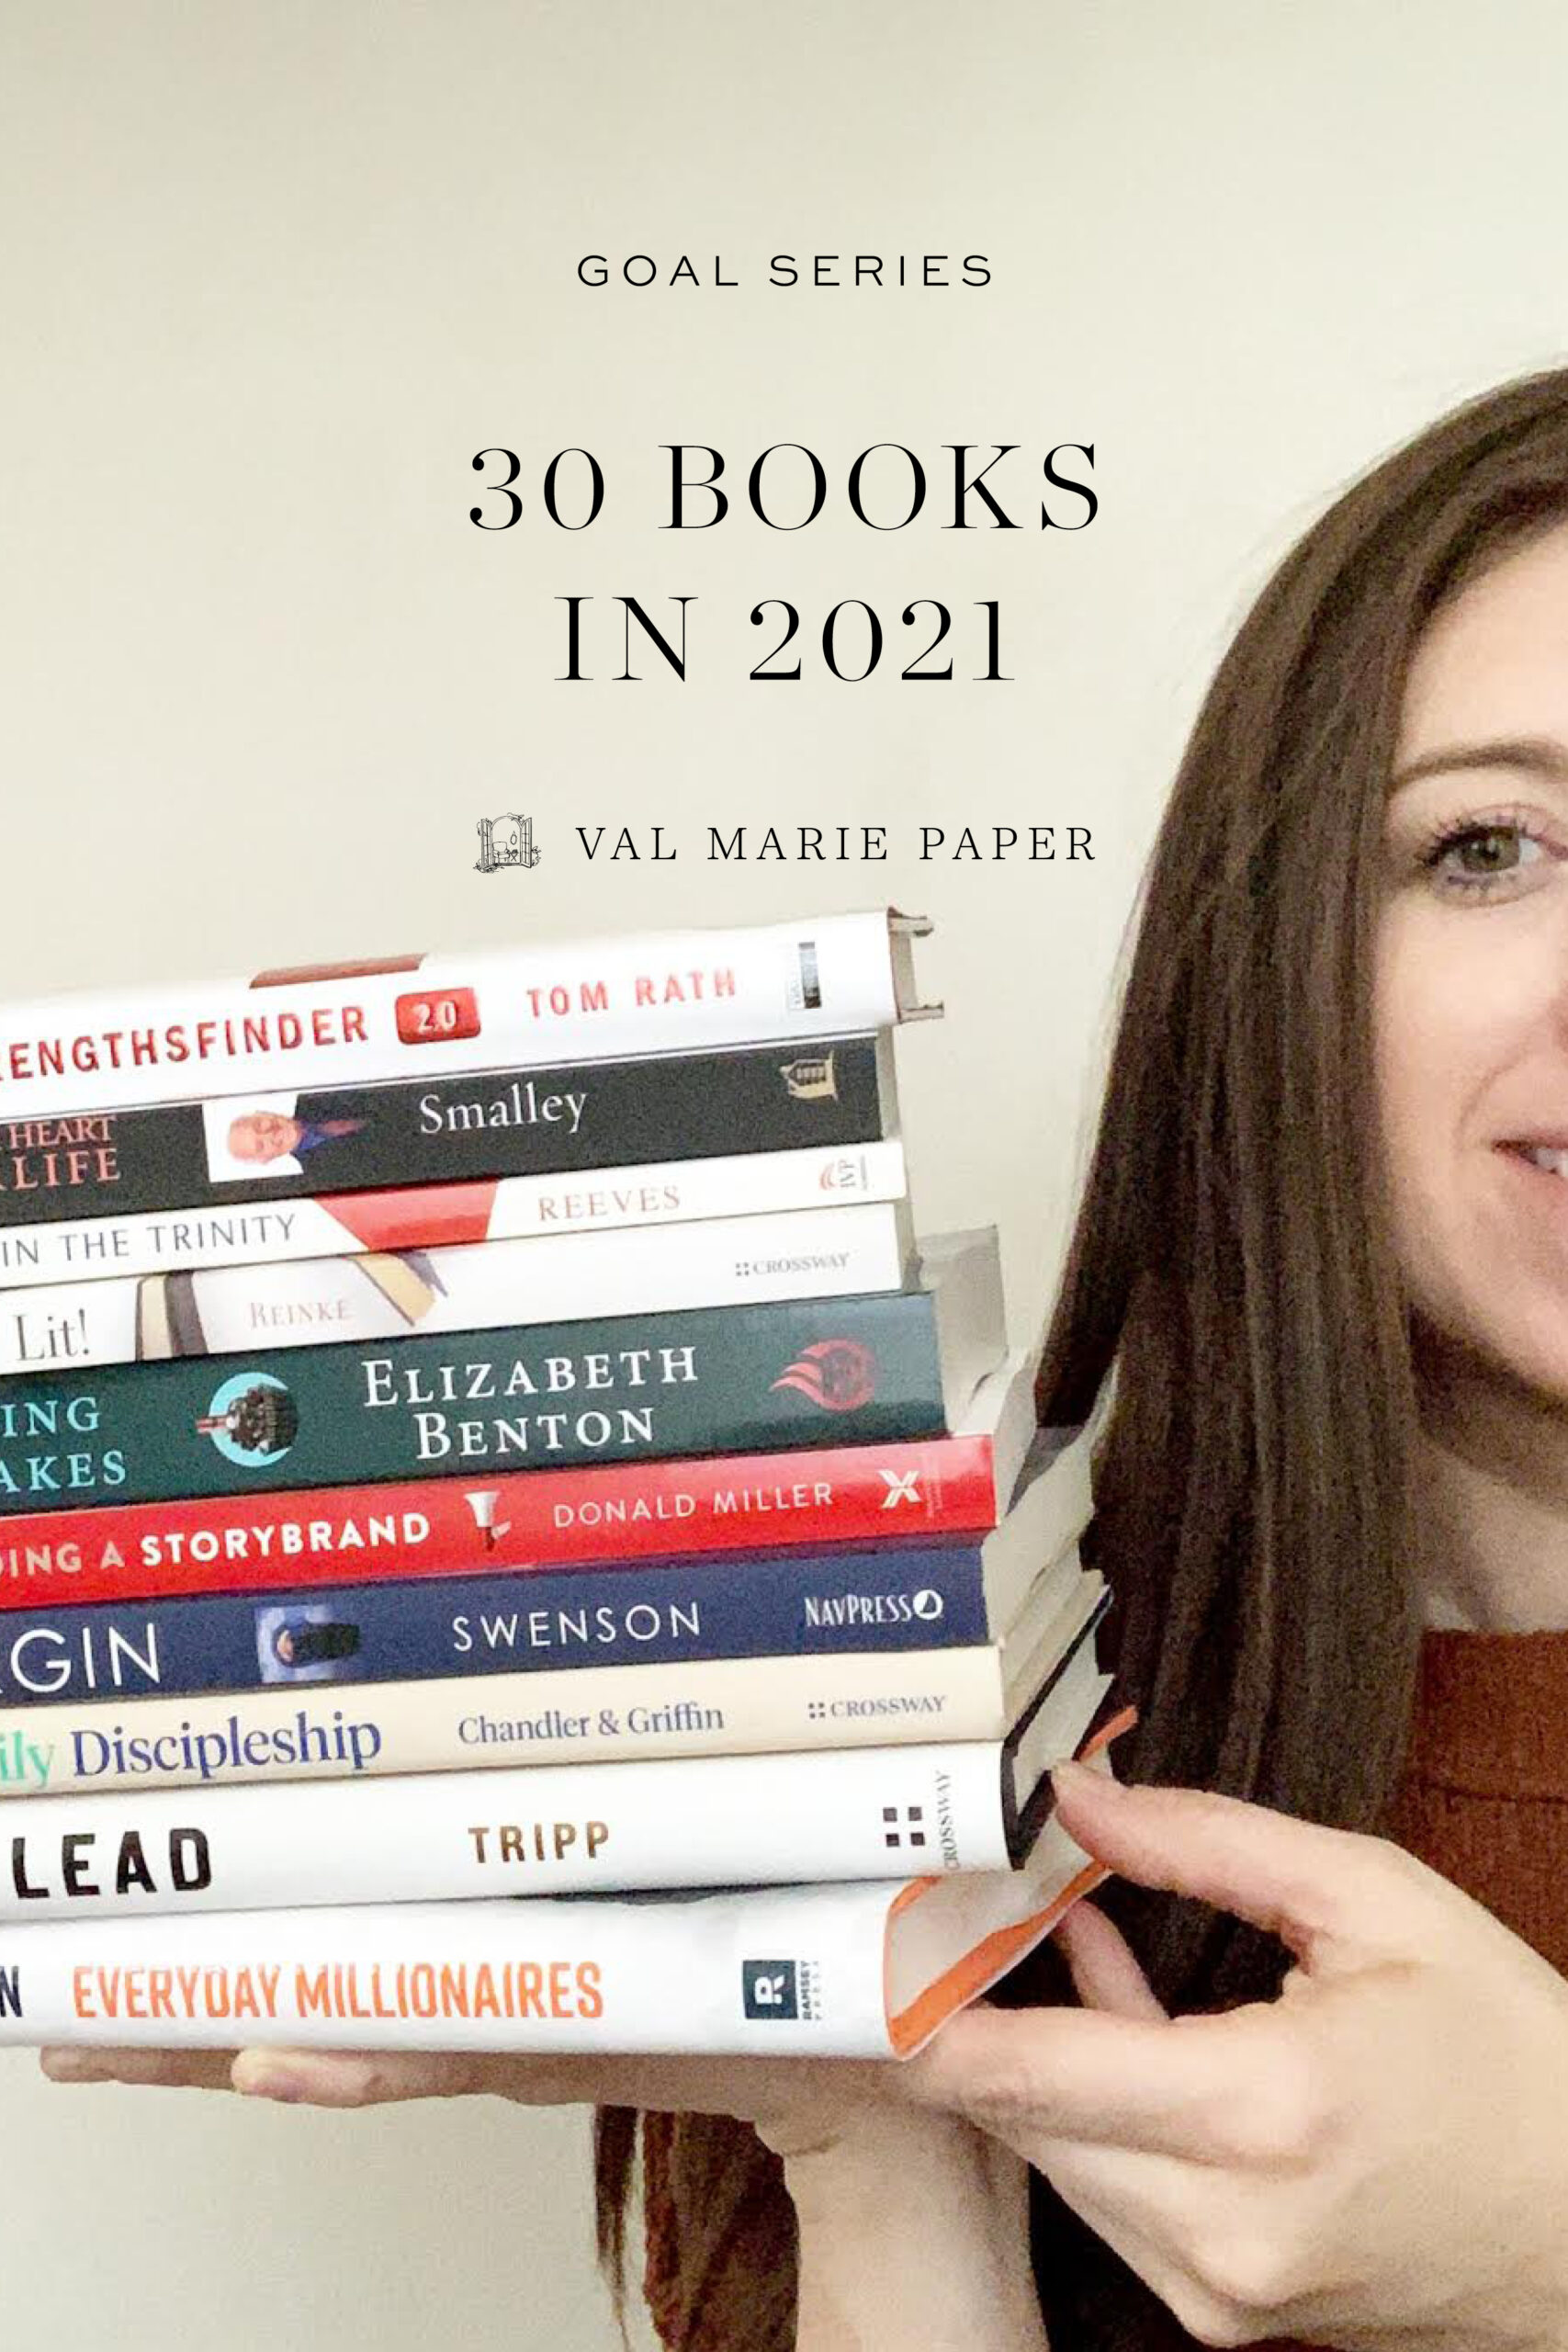 30 Books in 2021 by Valerie Woerner | Val Marie Paper, books, reads, book list, tools, resources, life, book